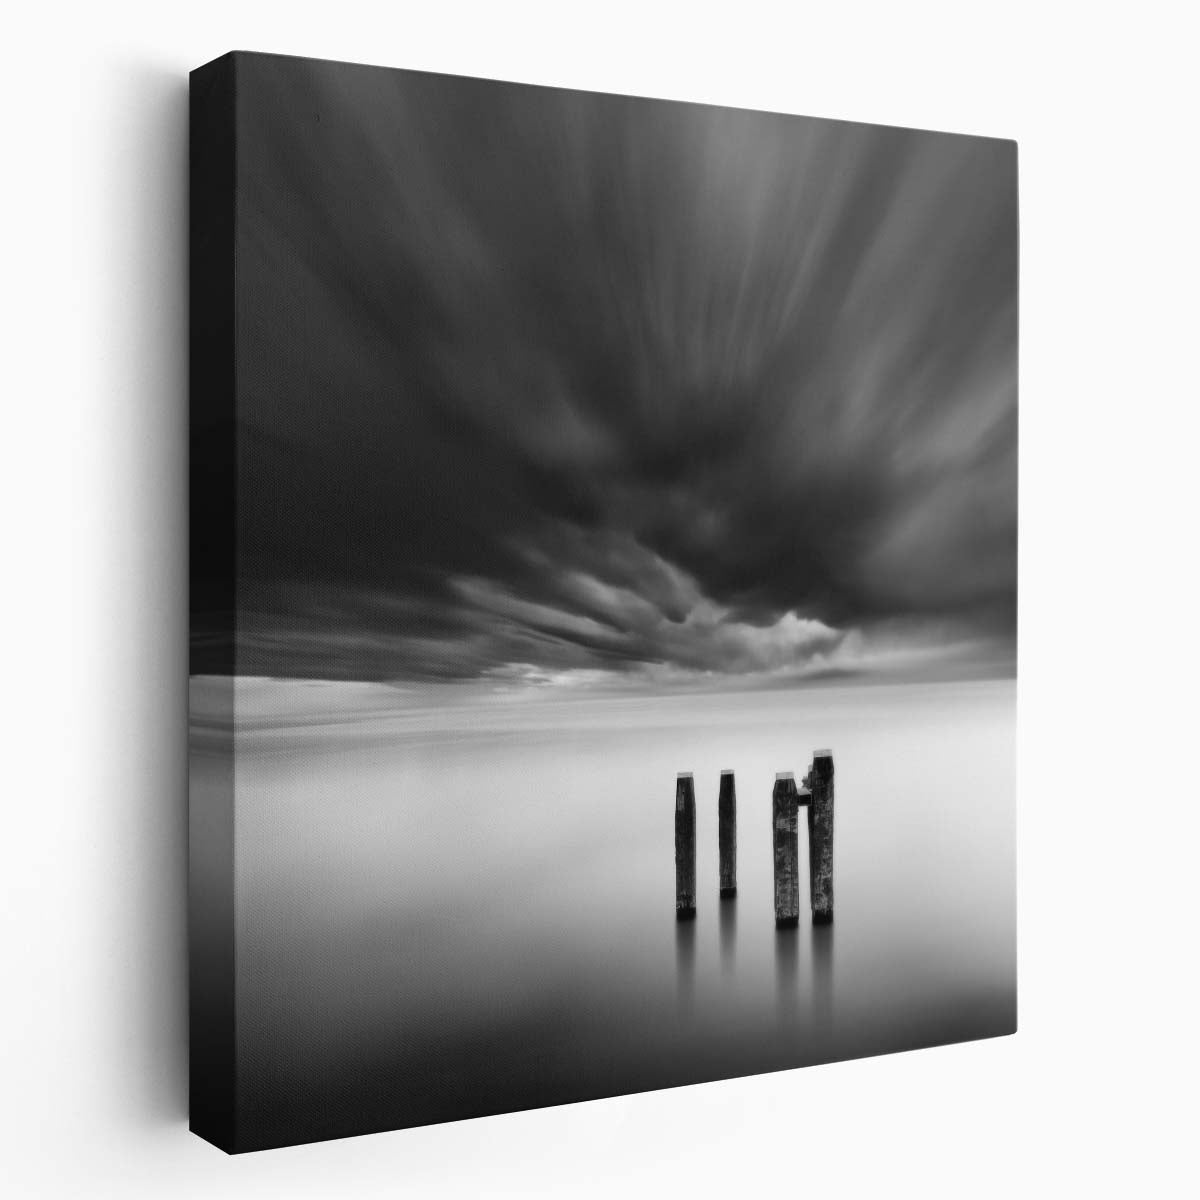 Windswept Decay in Monochrome Seascape by George Digalakis Wall Art by Luxuriance Designs. Made in USA.